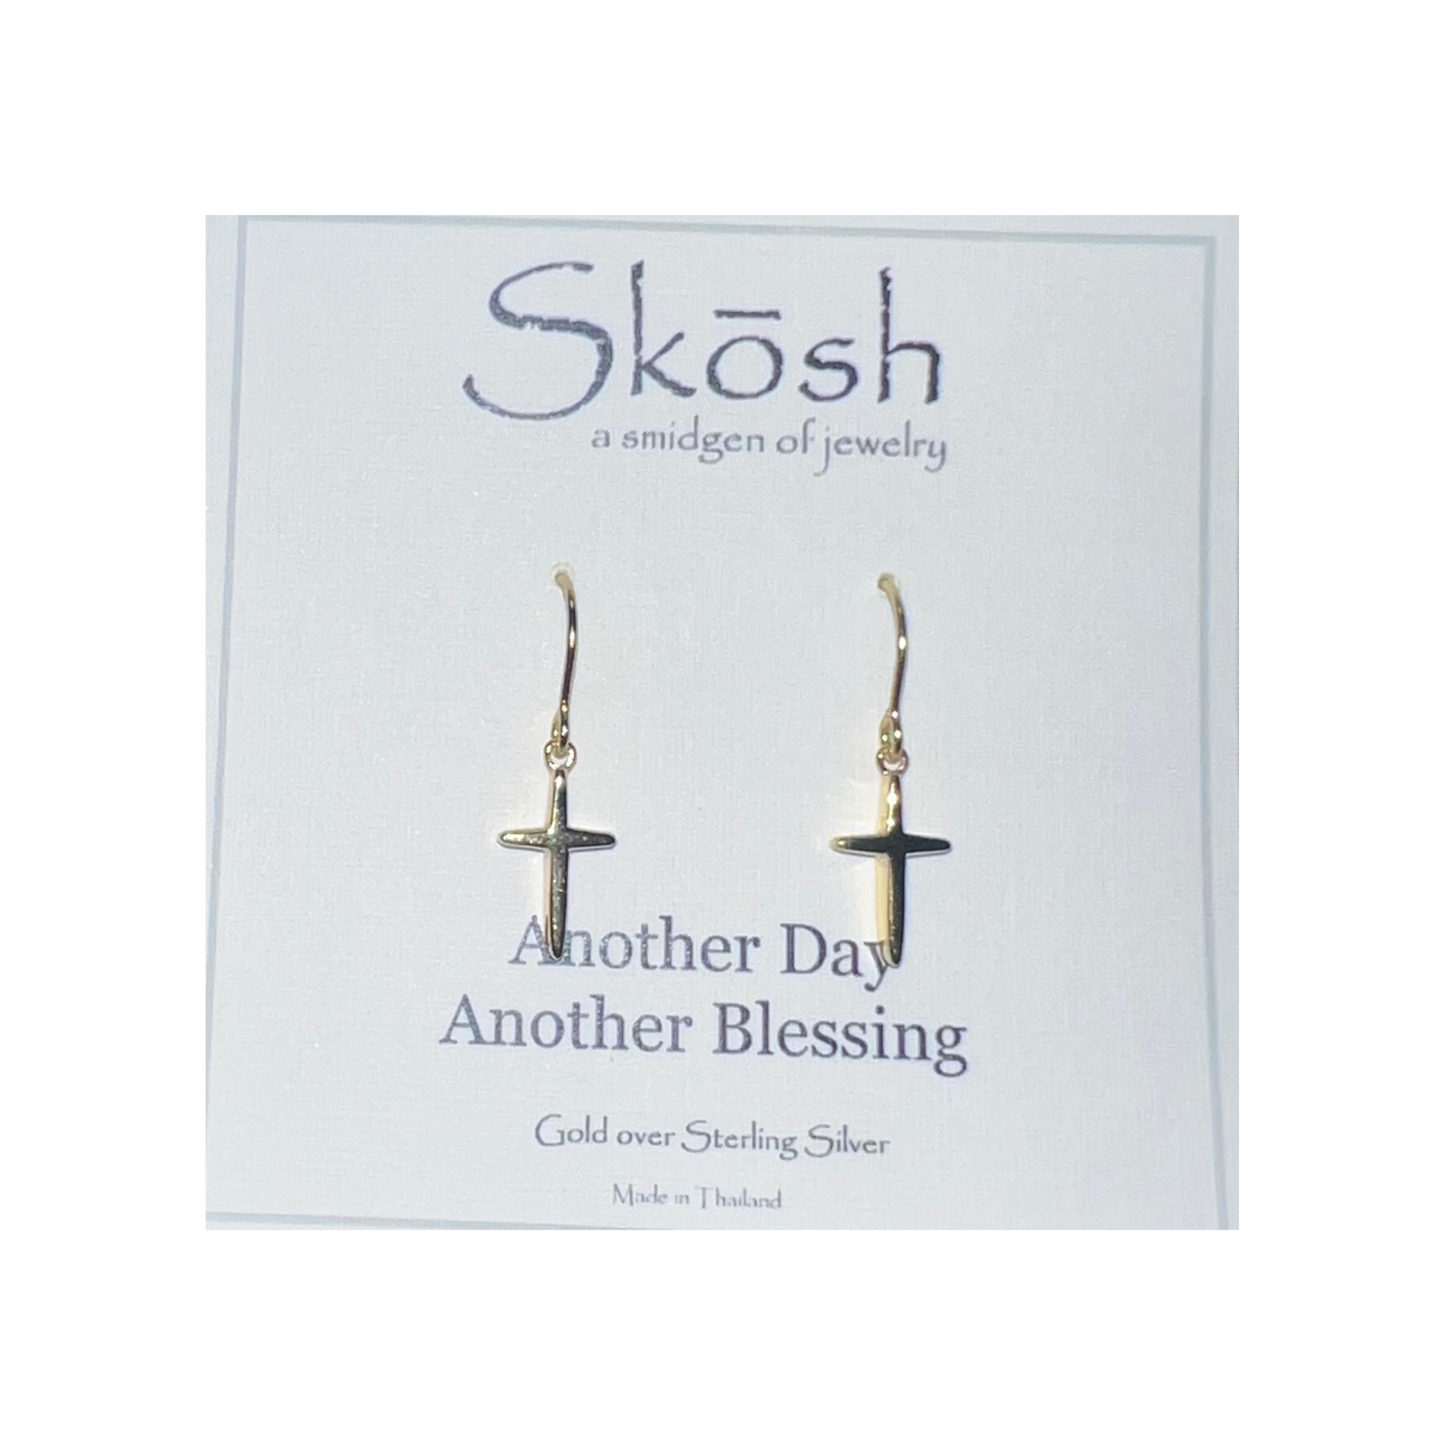 Accent your look with a classic style. These Cross Earrings feature a unique dangle design that comes in either silver or gold. Complete your wardrobe with a timeless and elegant accessory!